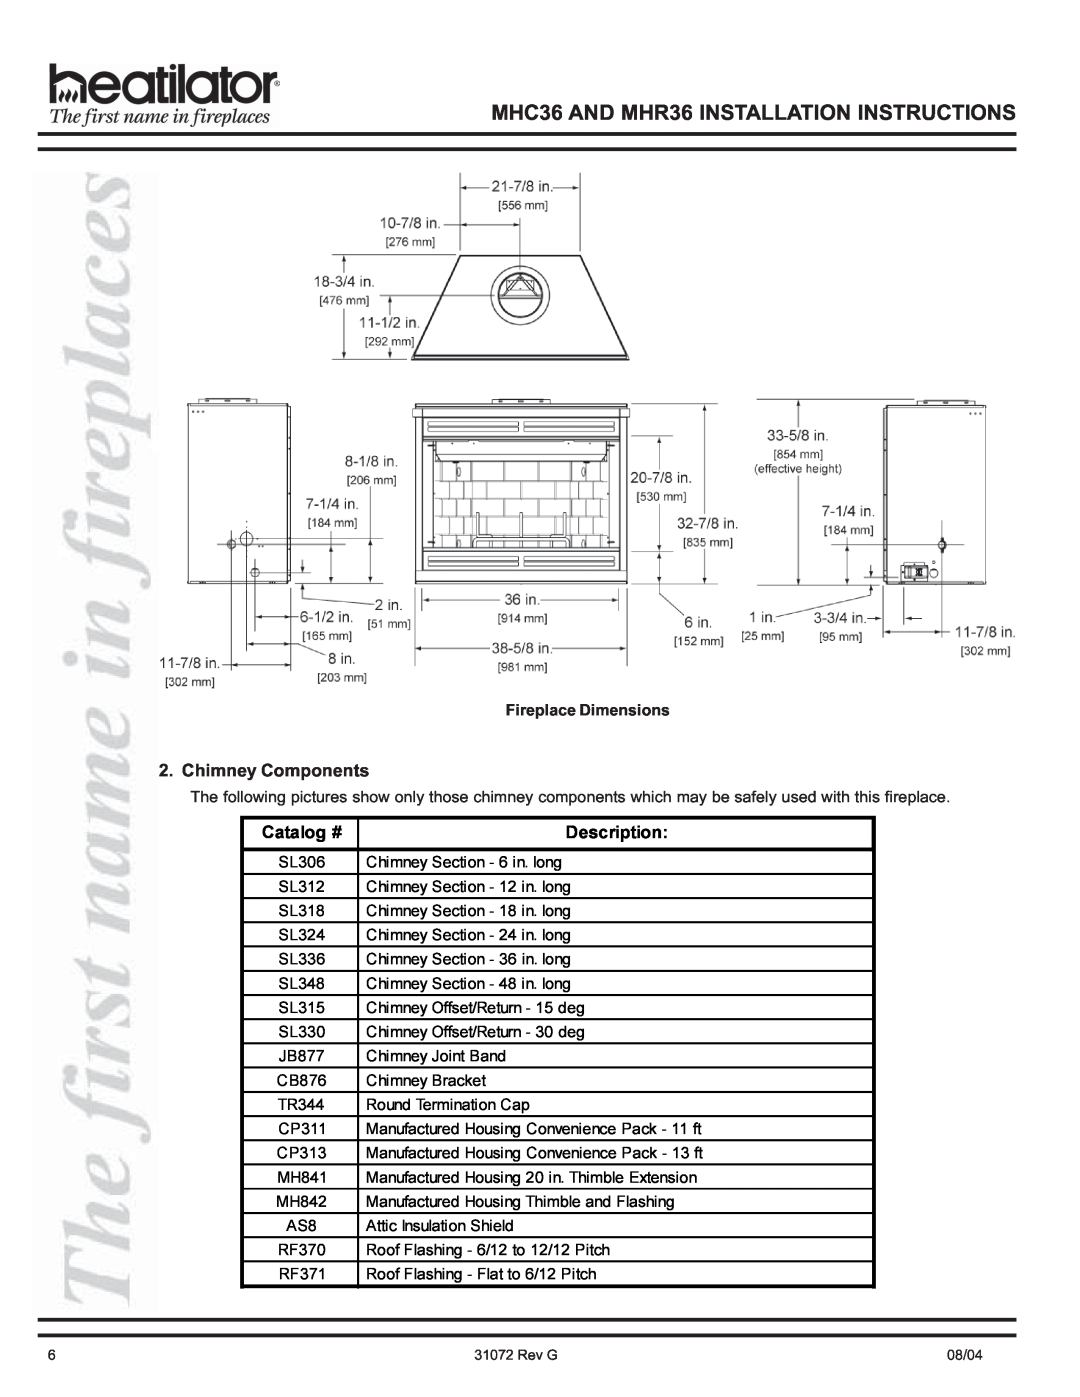 Heart & Home Collectables manual Chimney Components, MHC36 AND MHR36 INSTALLATION INSTRUCTIONS, Catalog #, Description 